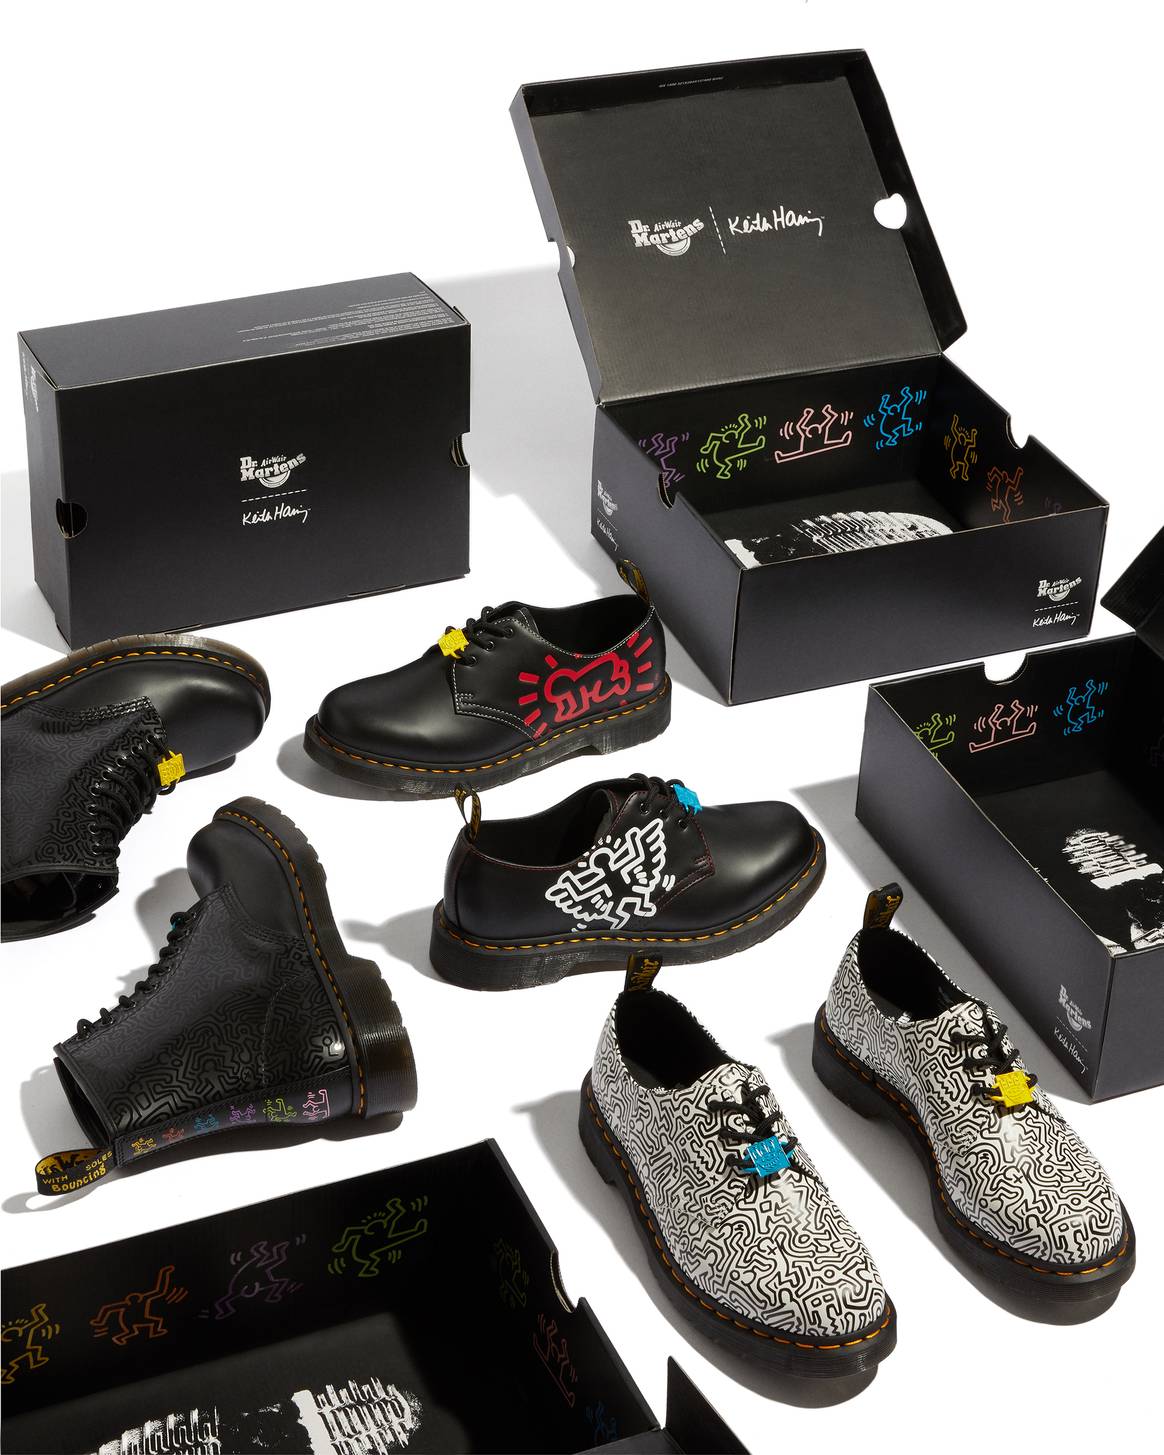 Foto: Dr. Martens x Keith Haring